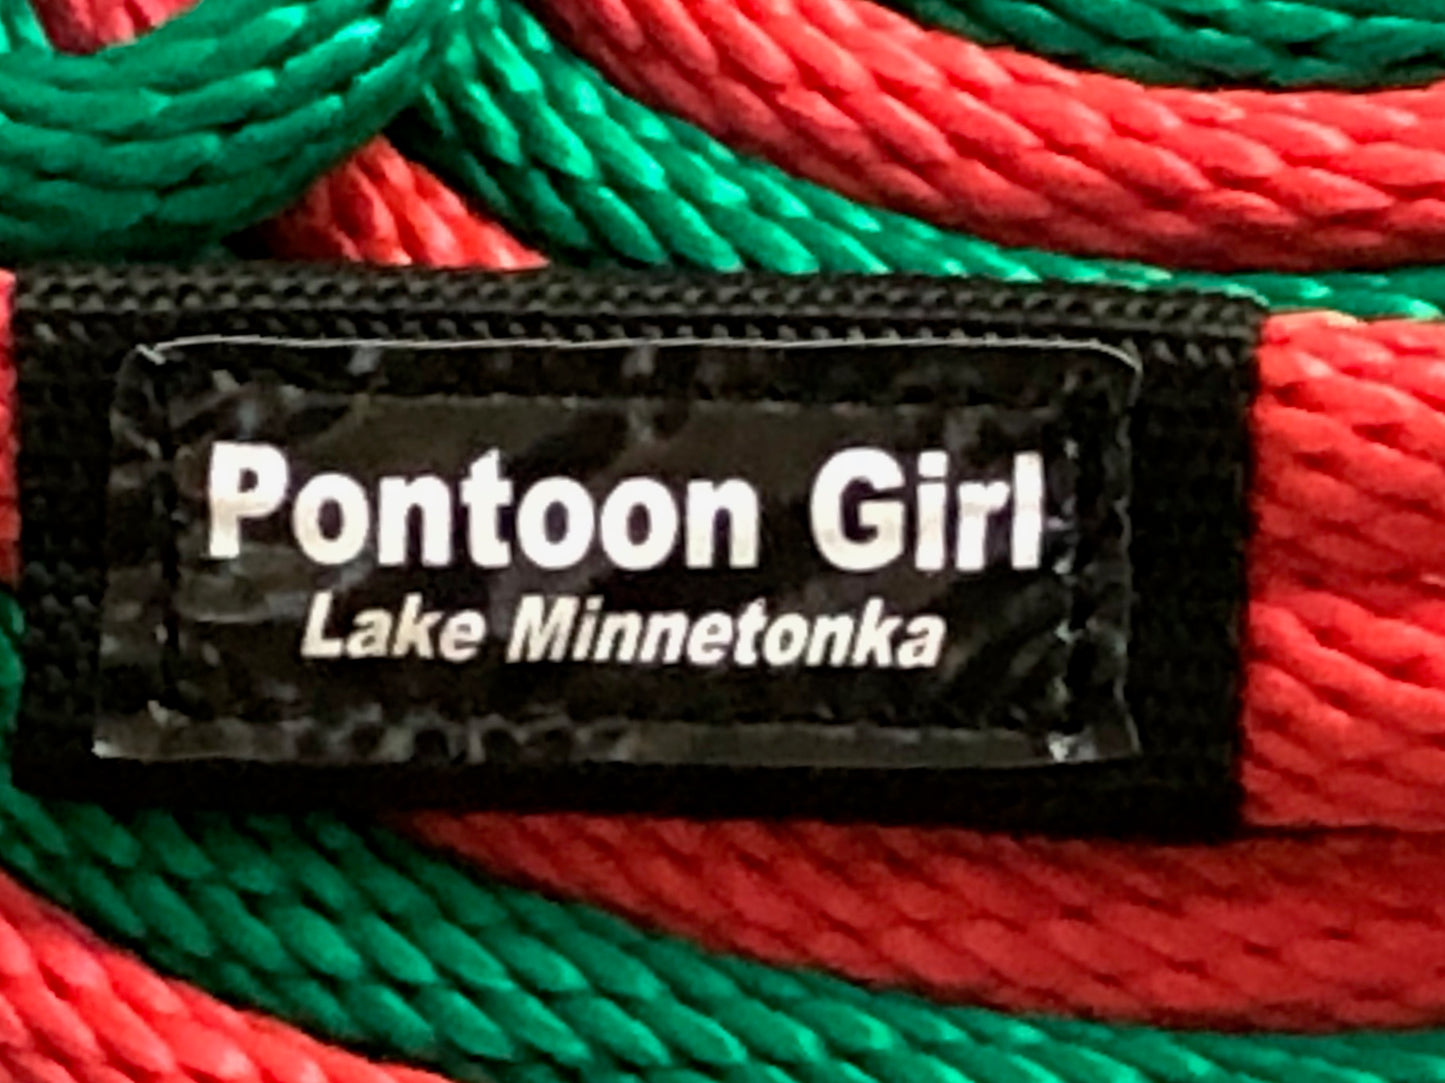 Personalized Boating Rope - Boat Tie Line - Mooring and Docking Line